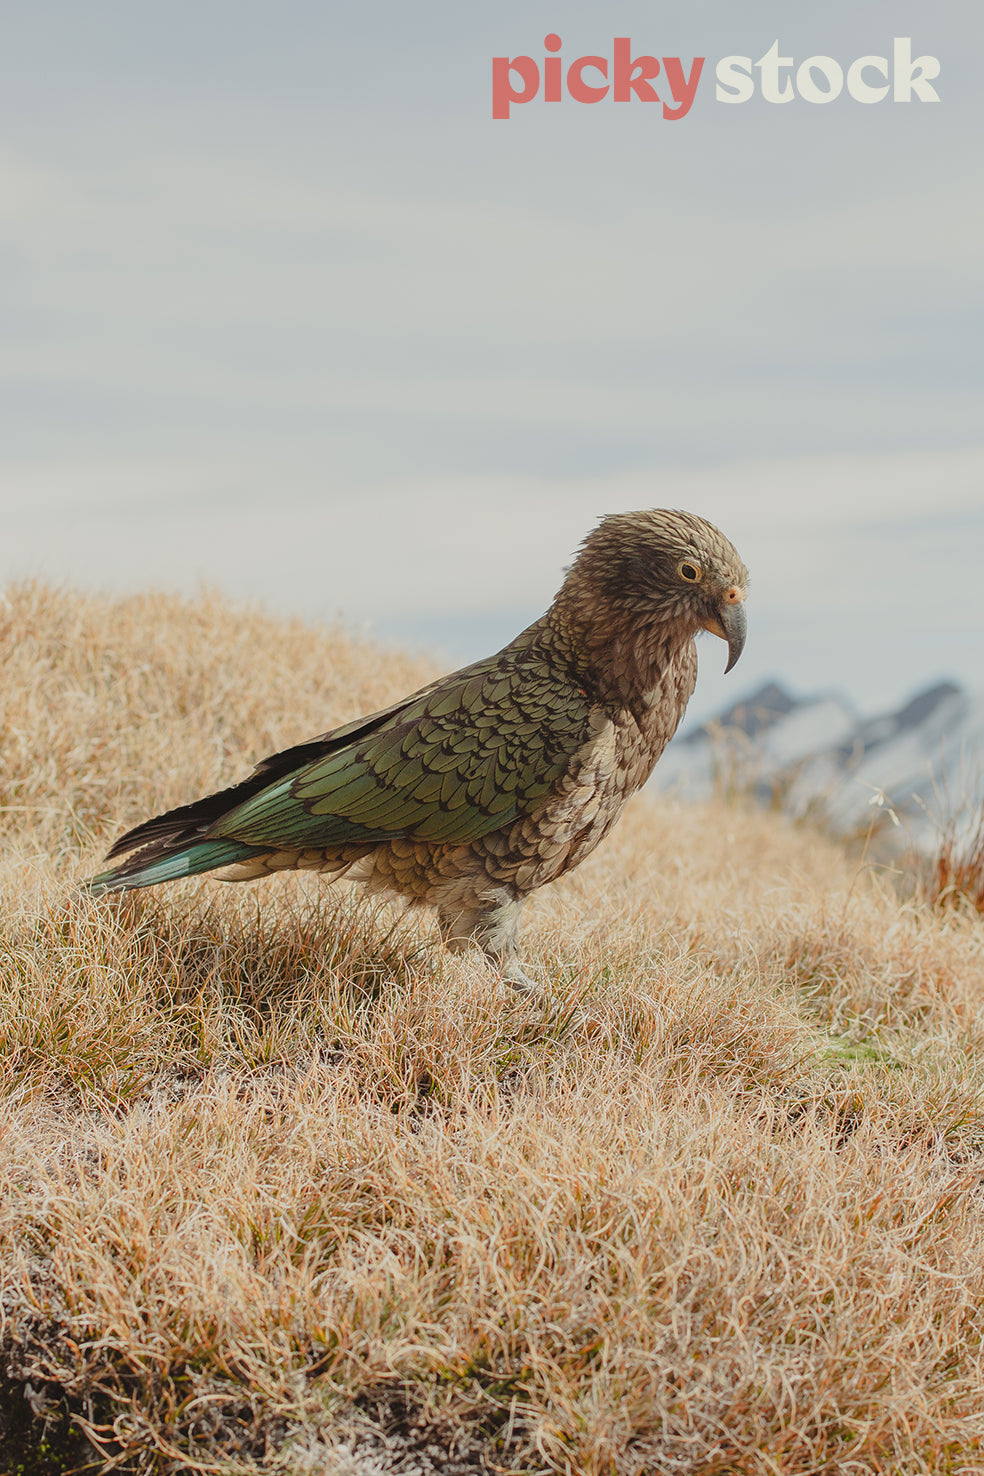 Full profile of NZ native Kea parrot in mountain tussock. Side on to camera. Grass is dry and brown. Mountain in far distant background